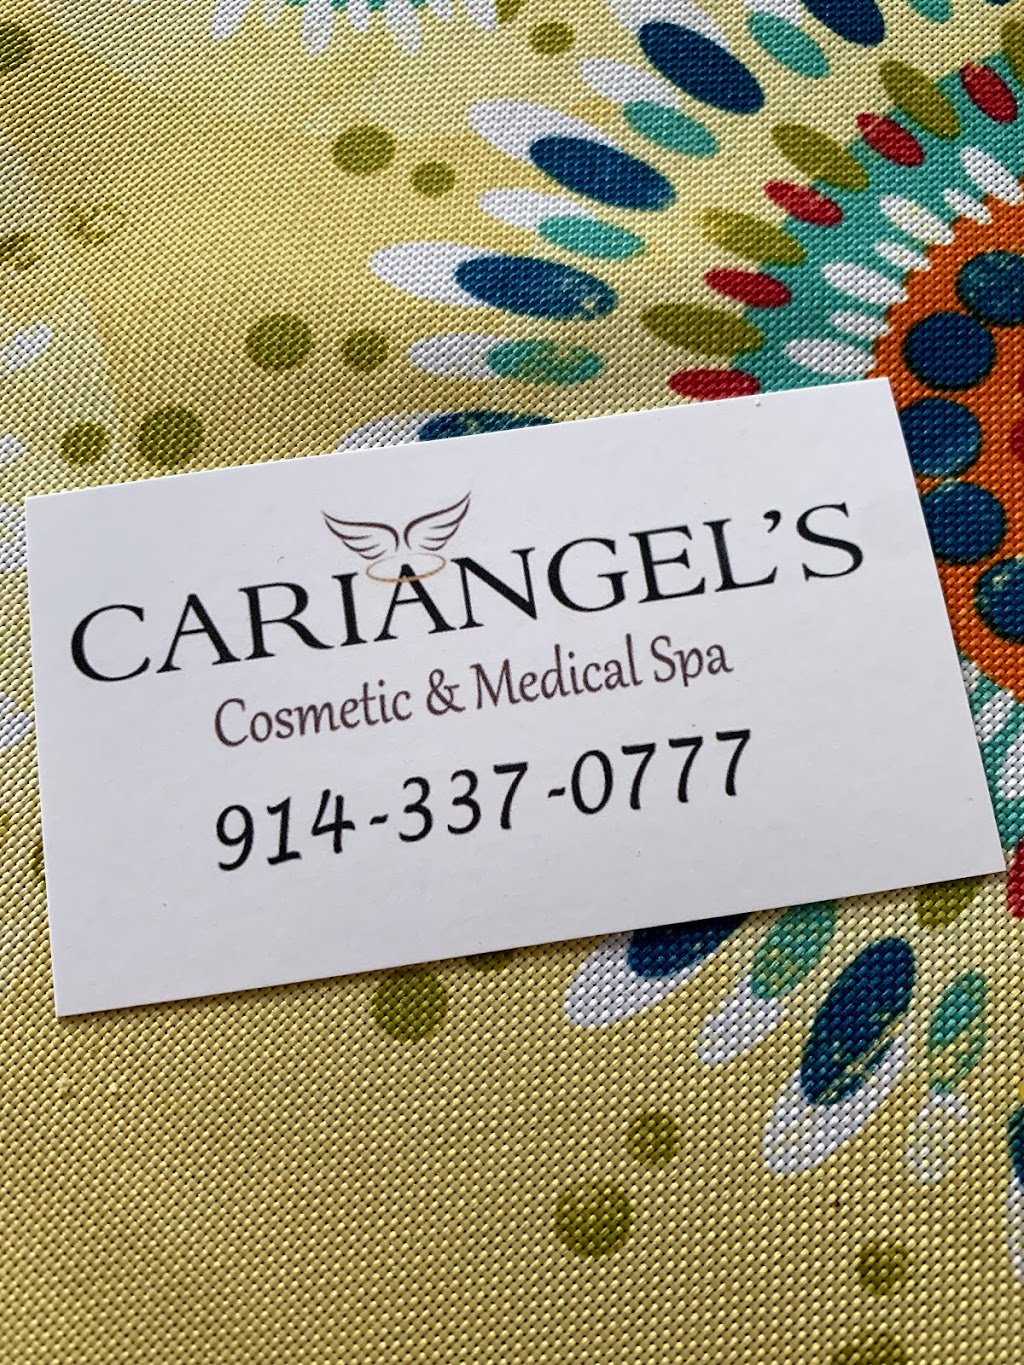 Cariangels Cosmetic and Medical Spa | 455 Central Park Ave #212, Scarsdale, NY 10583 | Phone: (914) 337-0777